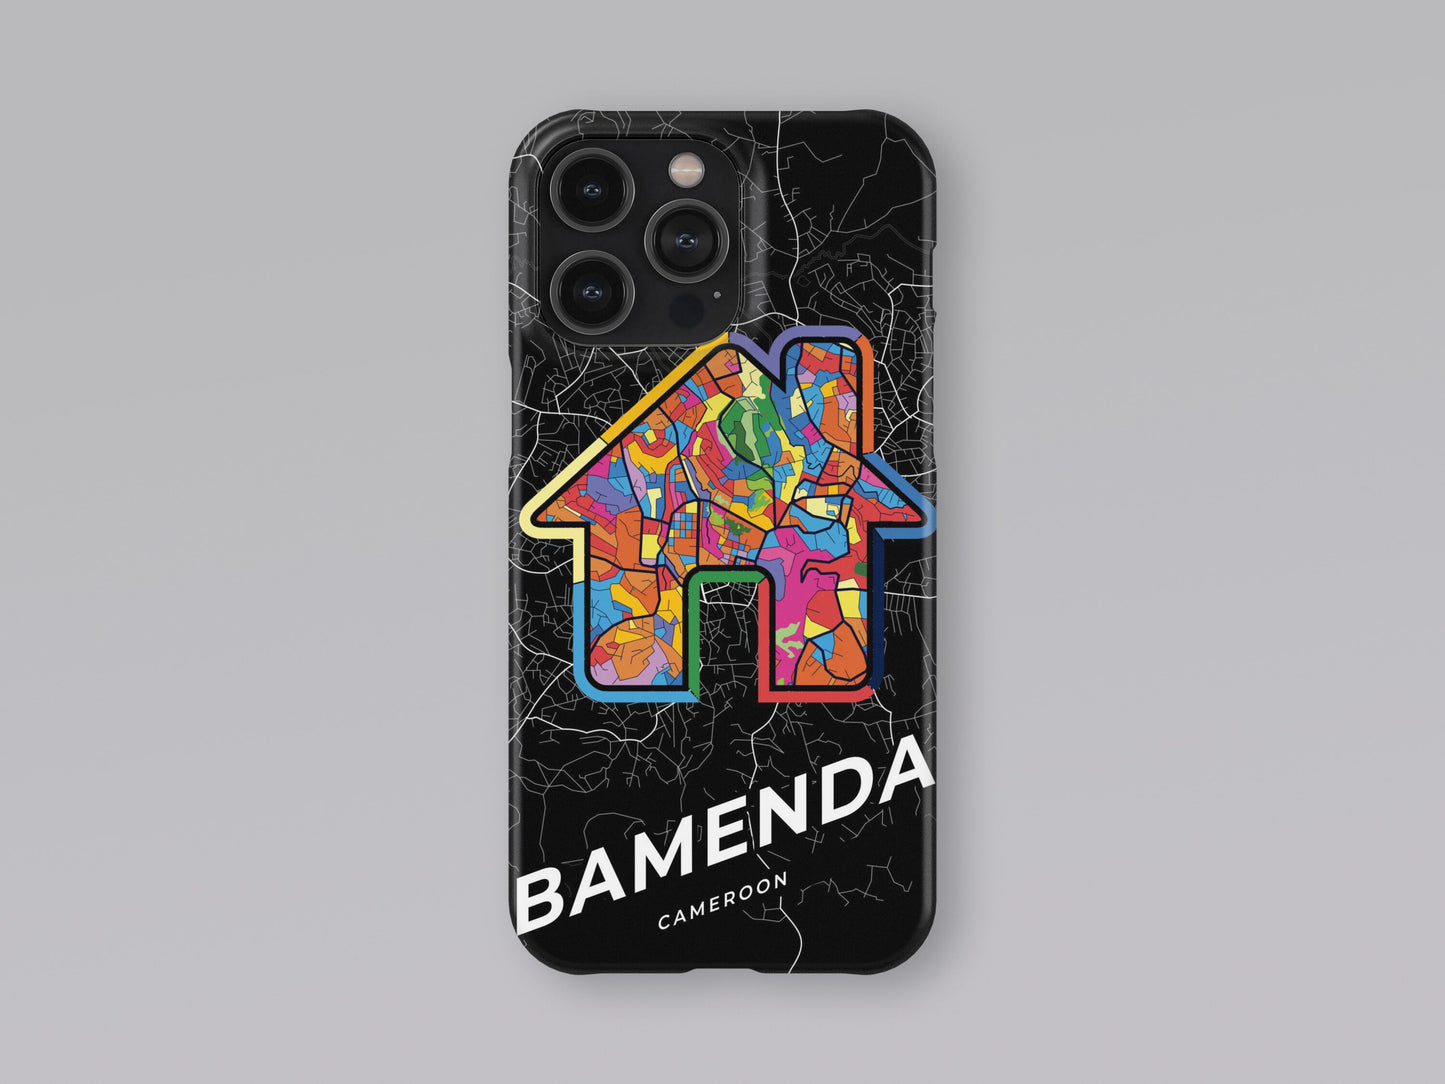 Bamenda Cameroon slim phone case with colorful icon. Birthday, wedding or housewarming gift. Couple match cases. 3